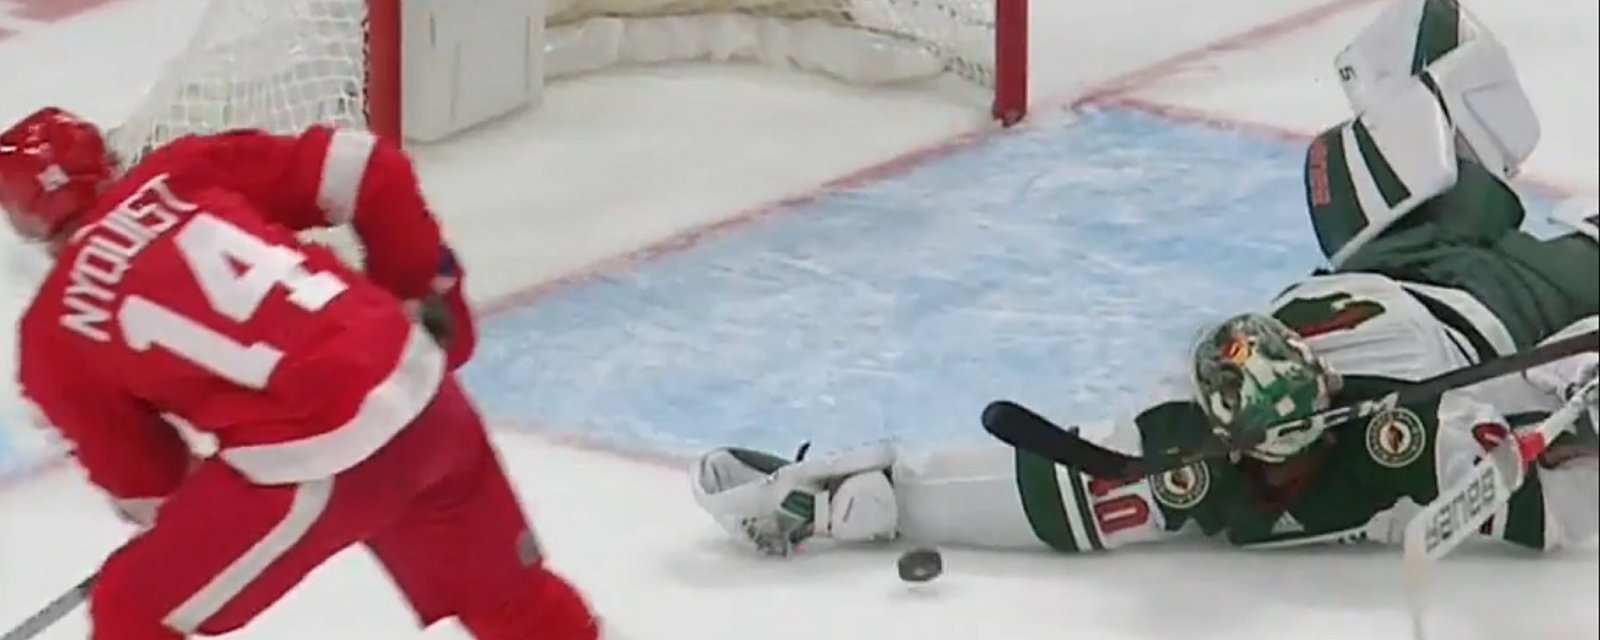 Nyquist can't believe his eyes after insane save by Devan Dubnyk.